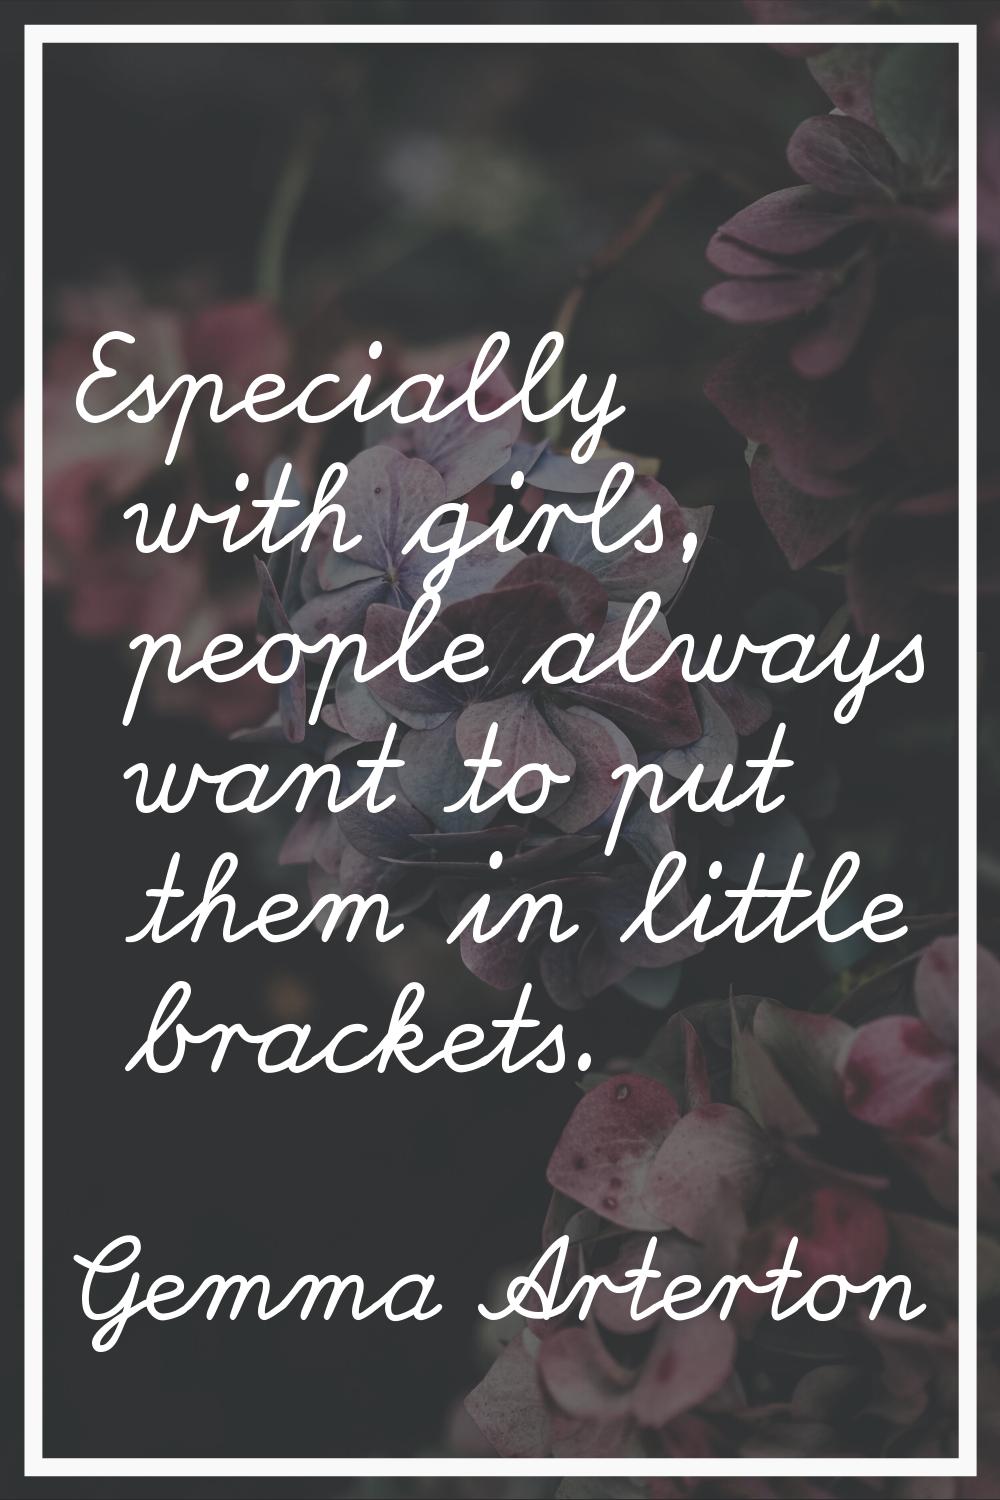 Especially with girls, people always want to put them in little brackets.